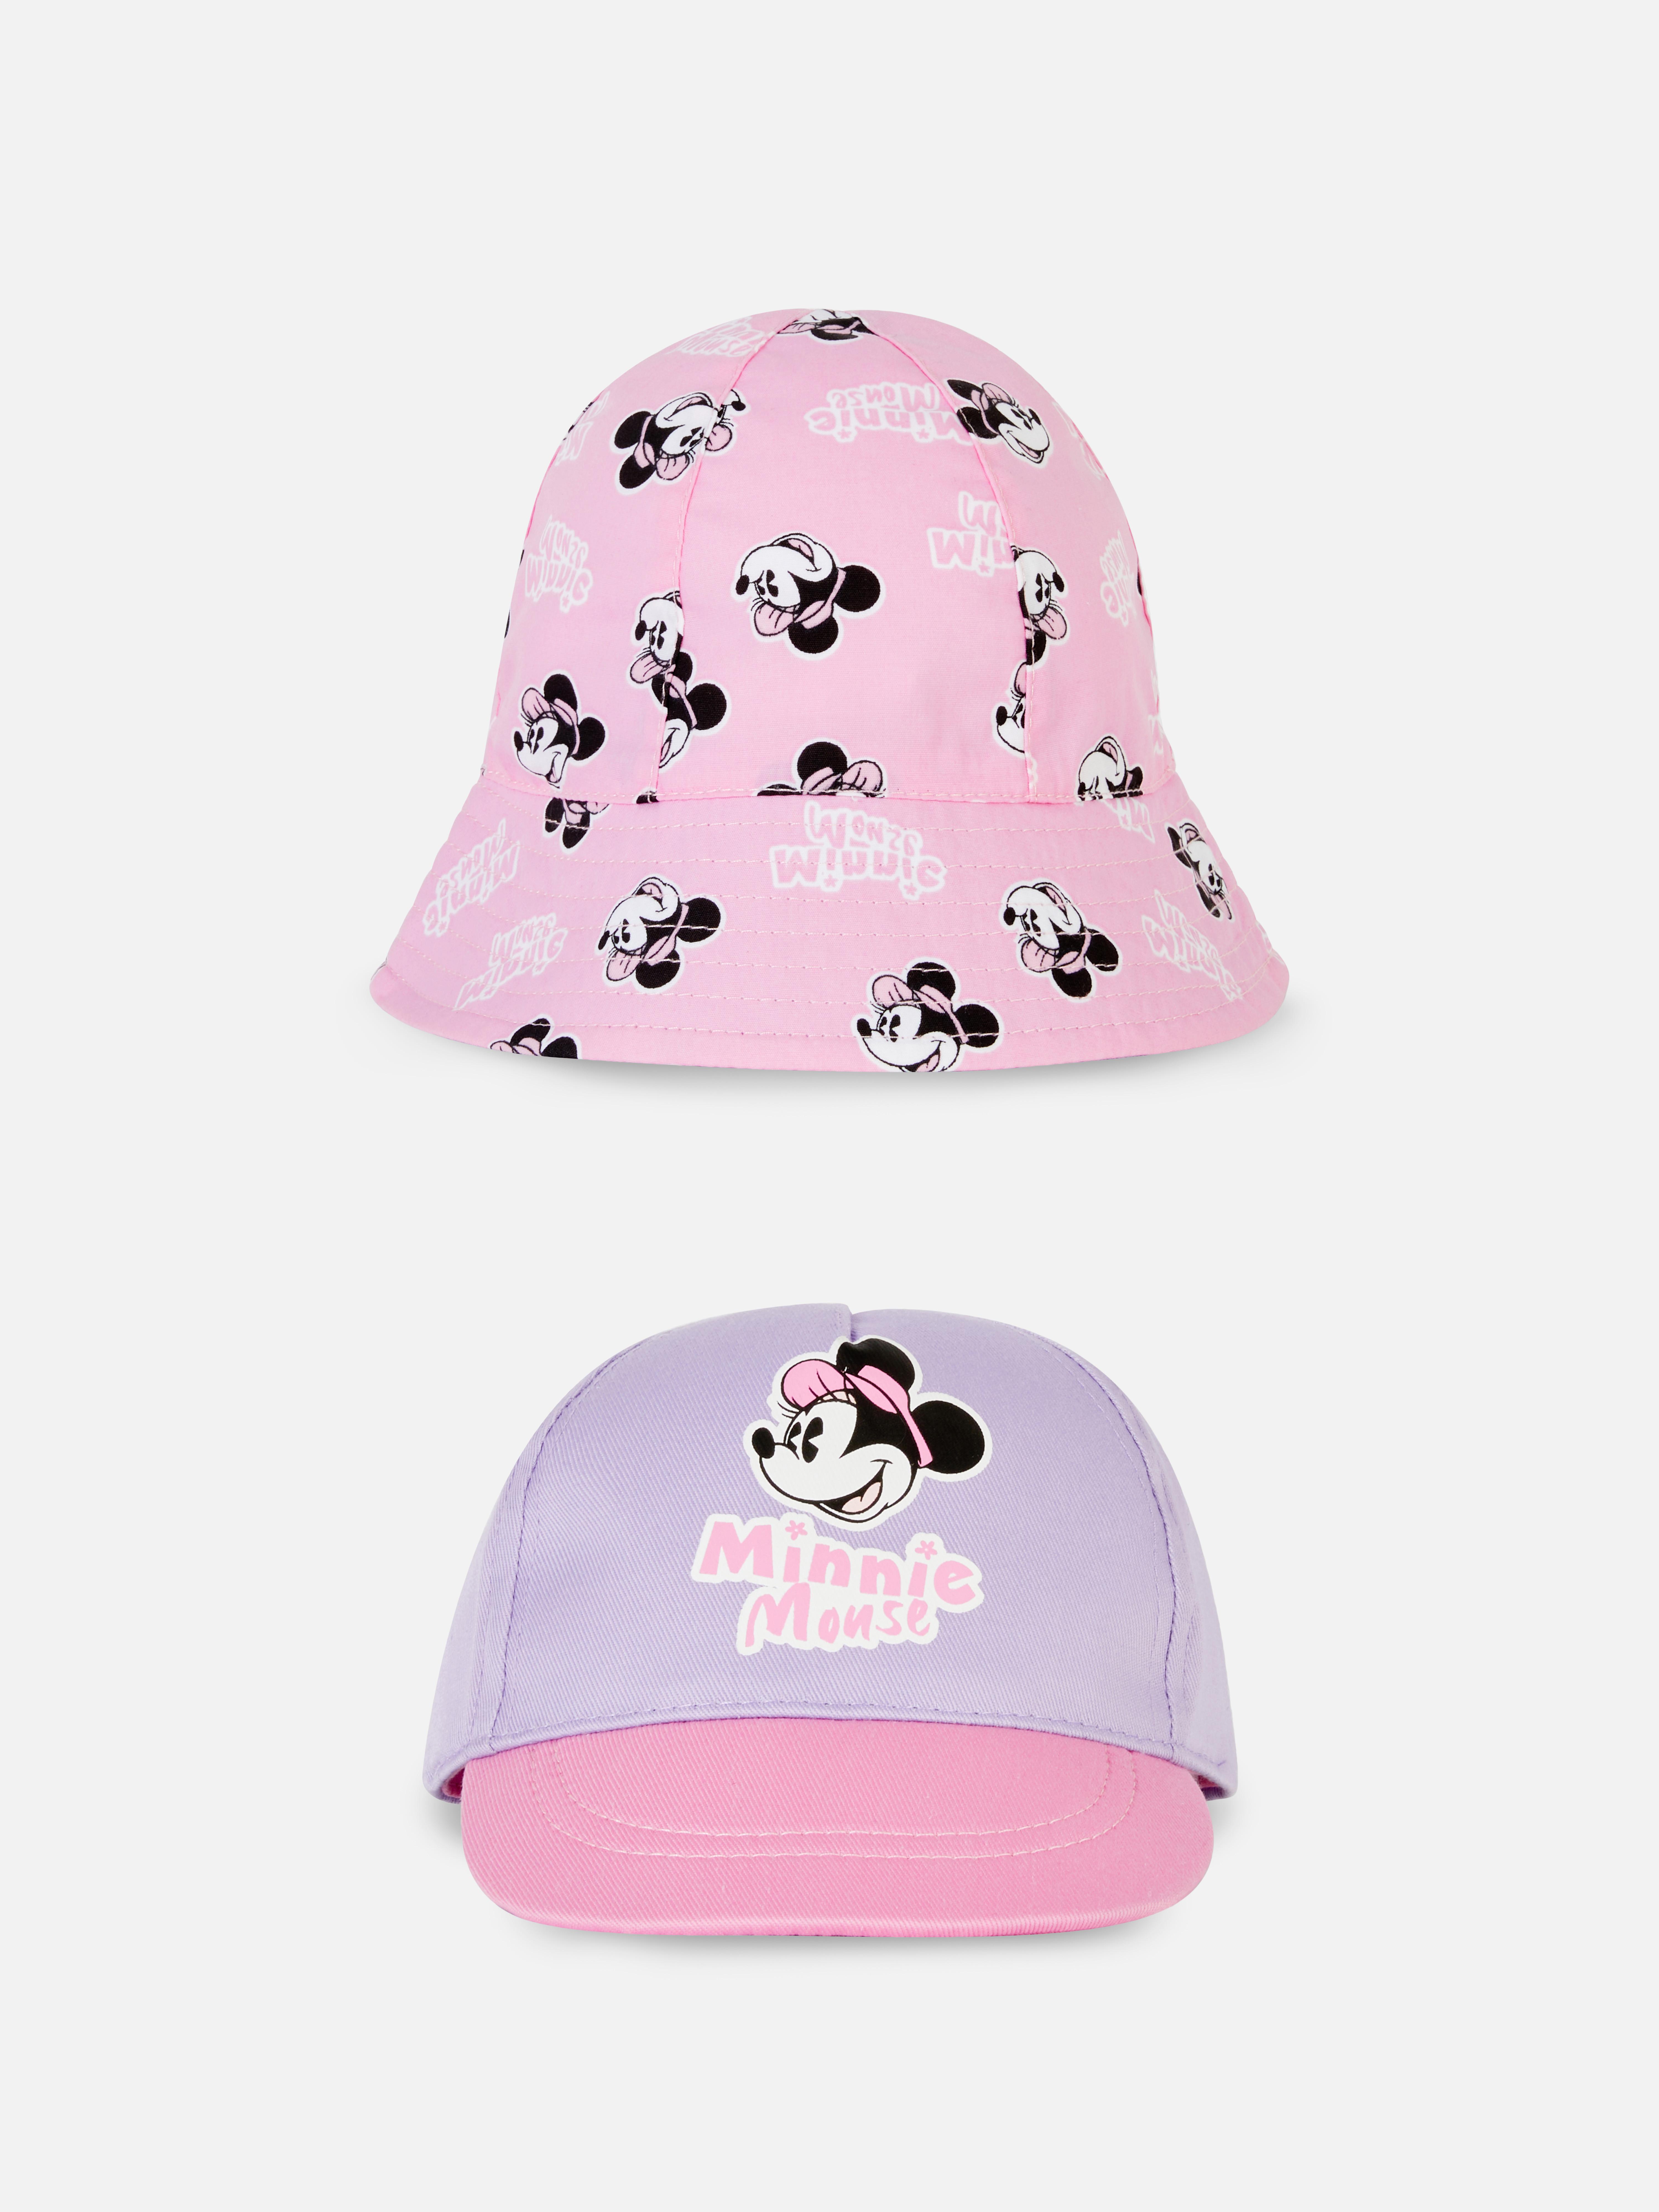 Disney's Minnie Mouse Baby Cap and Hat